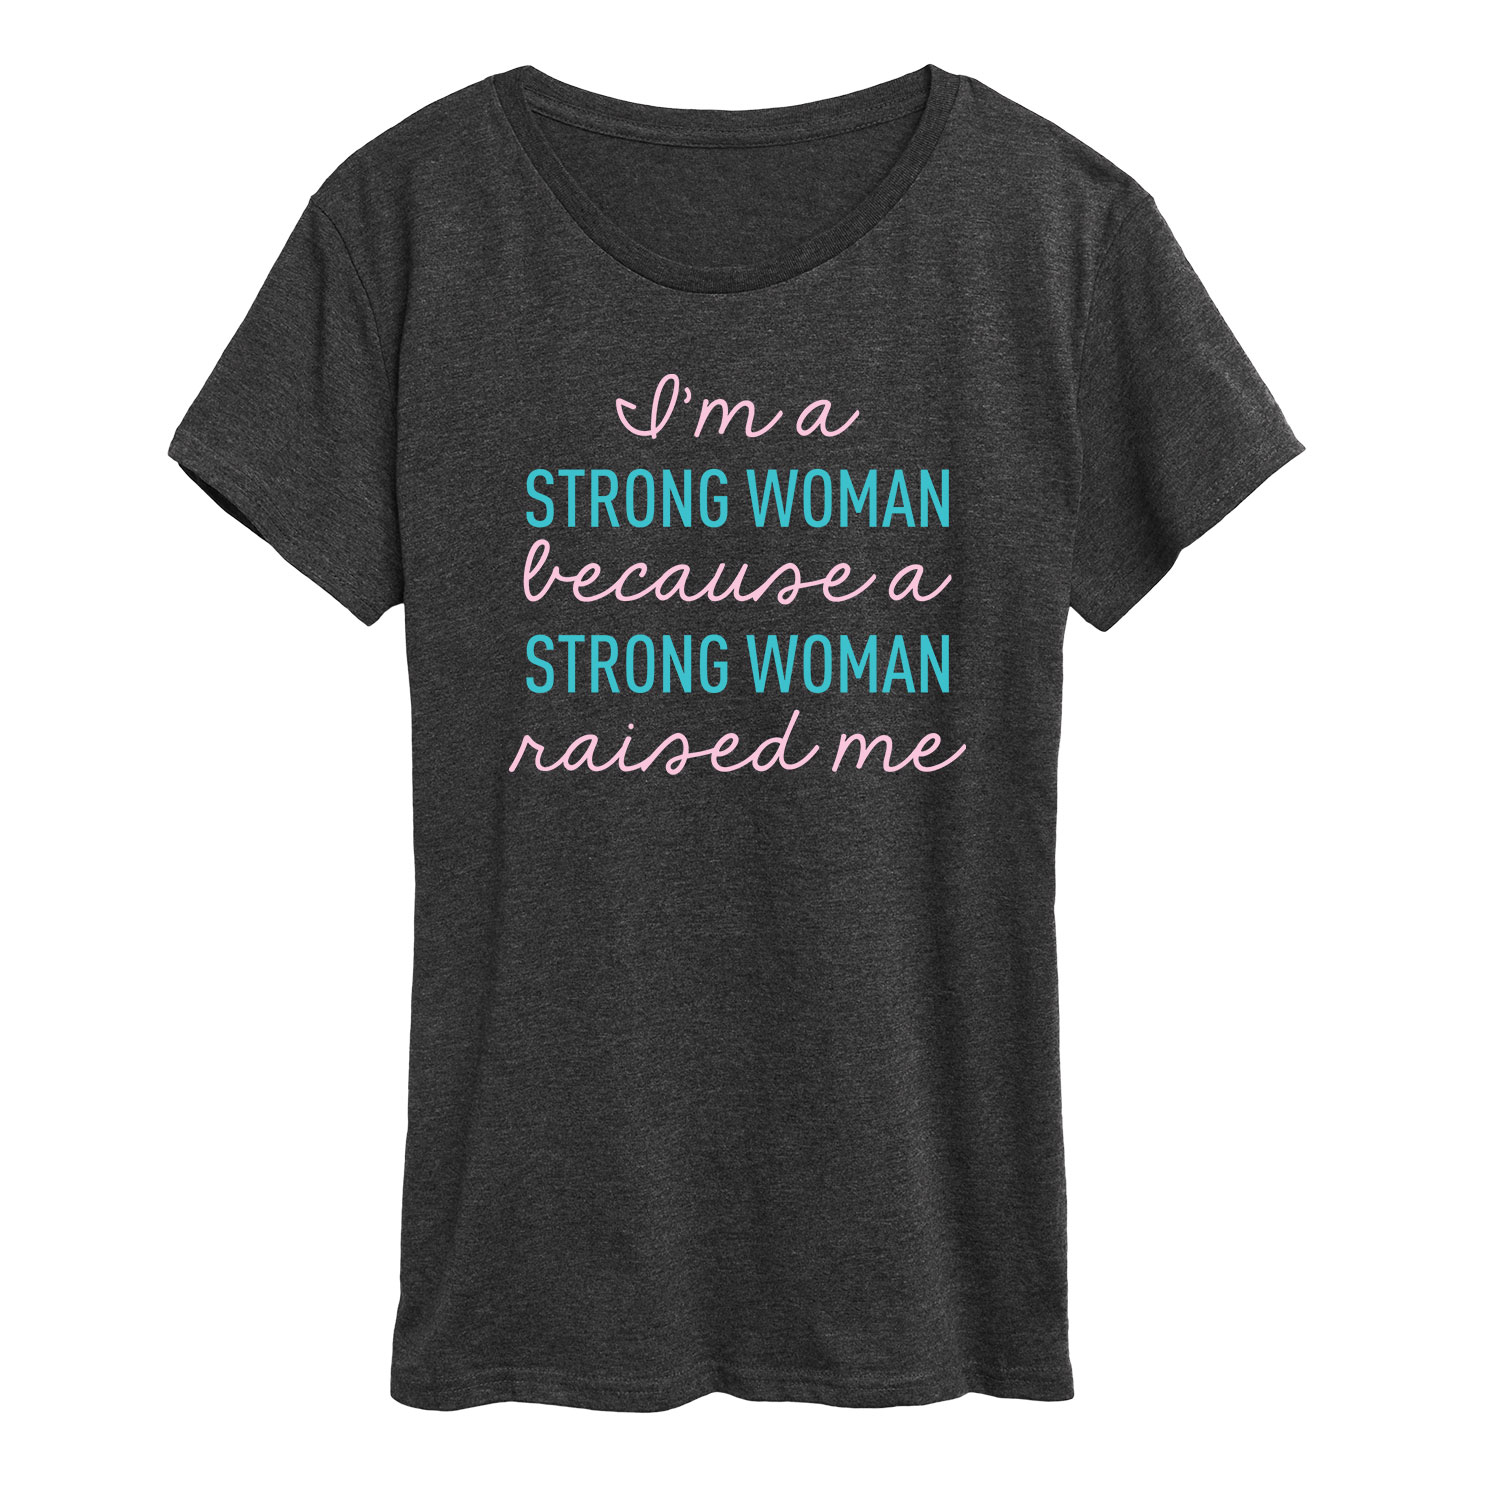 Instant Message - I'm A Strong Woman - Women's Short Sleeve Graphic T-Shirt - image 1 of 4